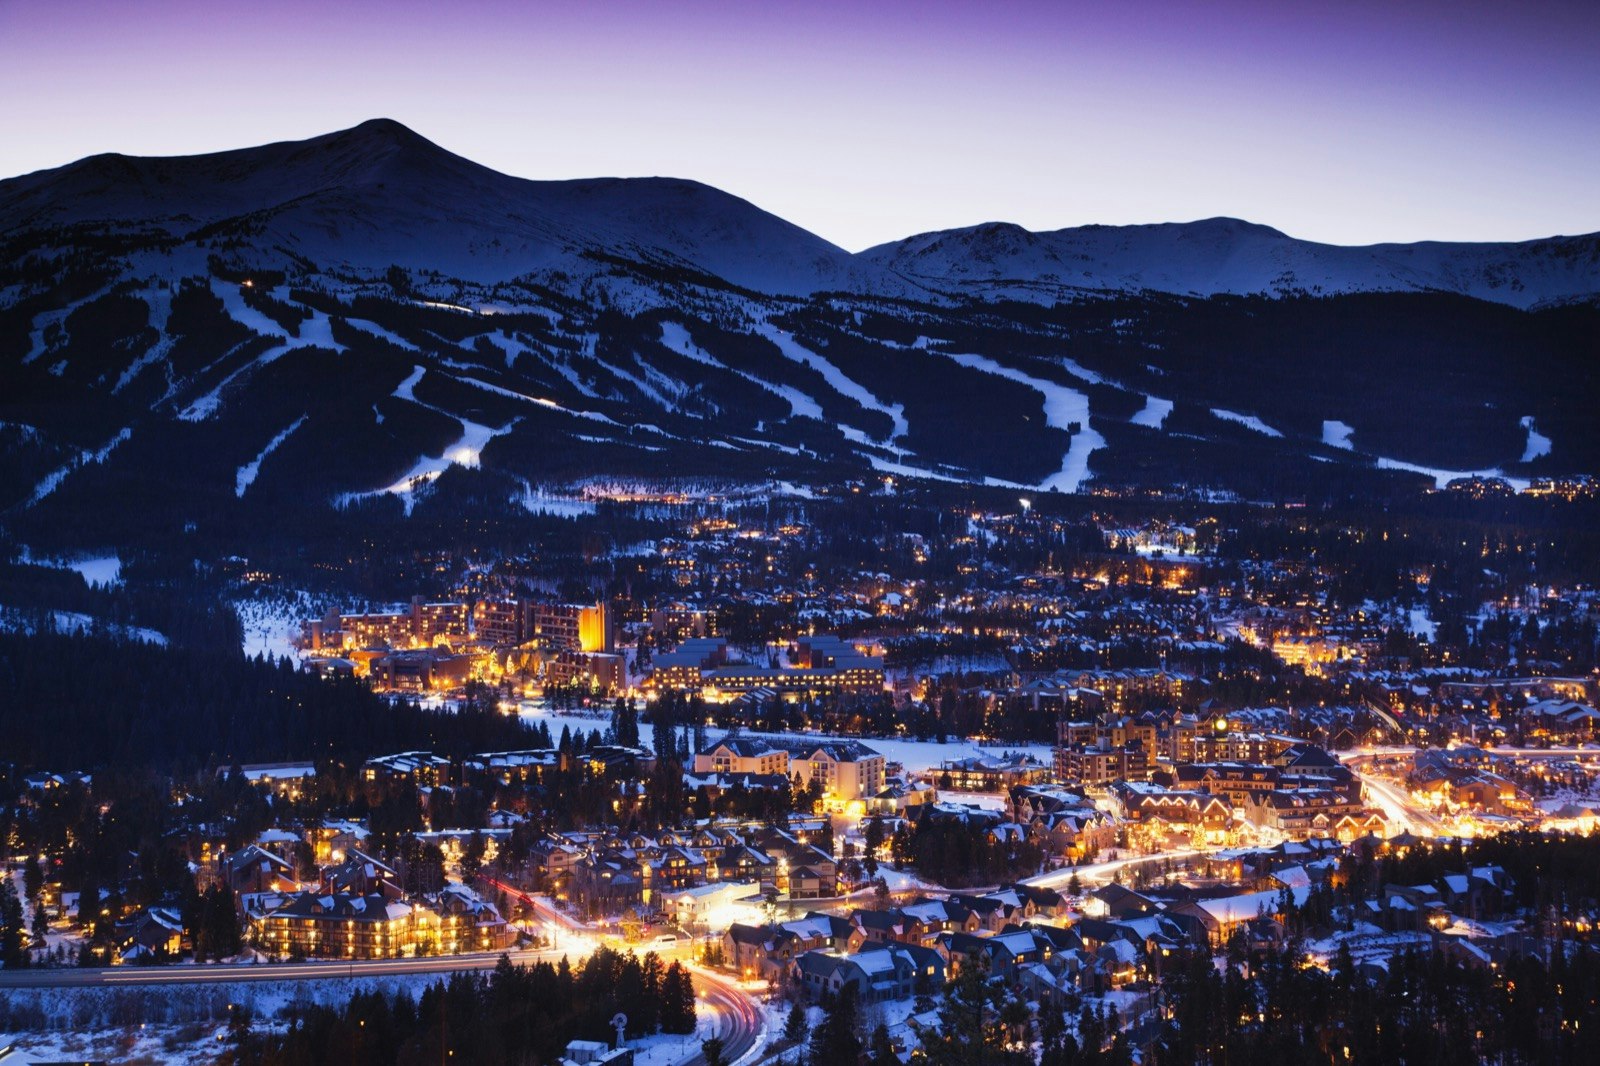 View of Breckenridge, Colorado at the base of a ski mountain lit up at night